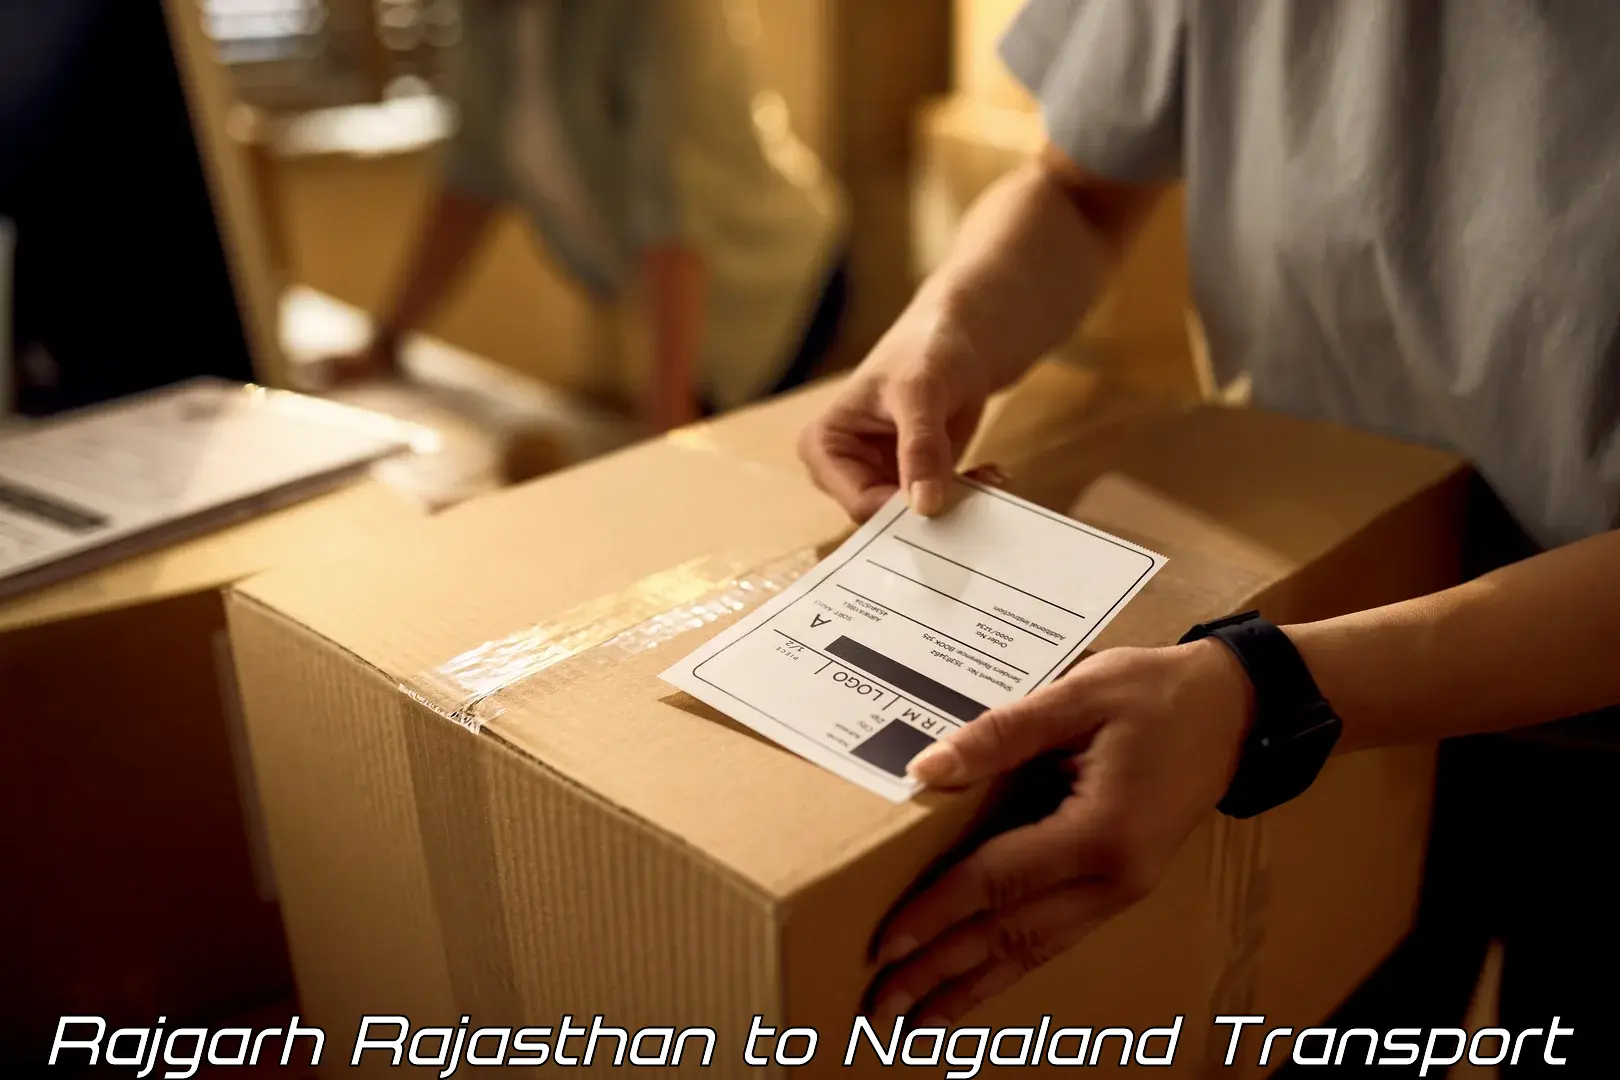 Goods delivery service in Rajgarh Rajasthan to Nagaland